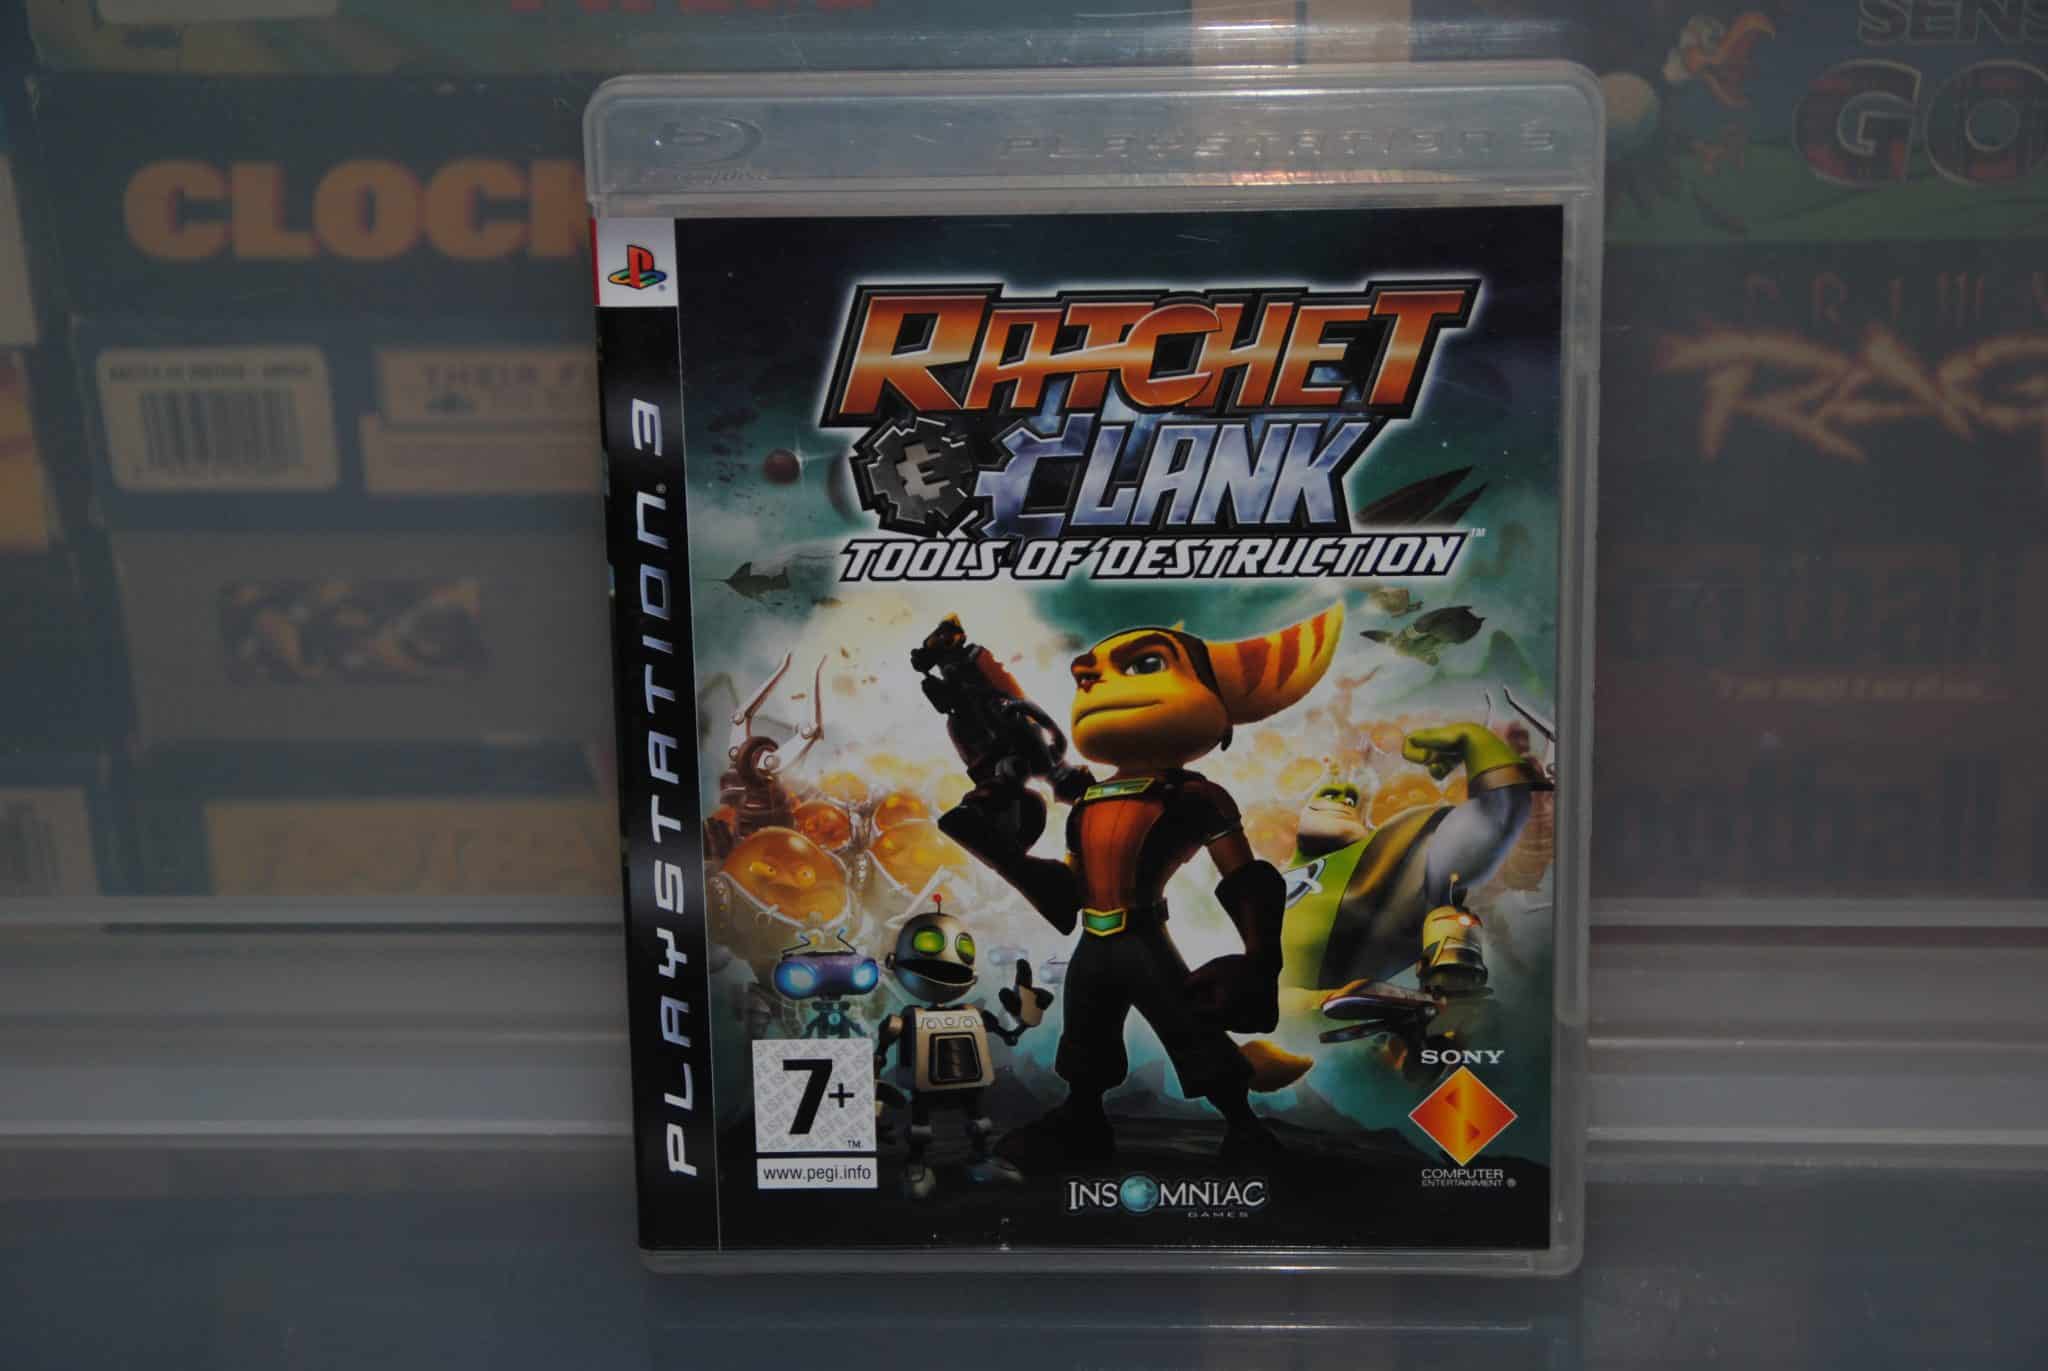 Ratchet & Clank: Size Matters [Platinum] [Video Game]